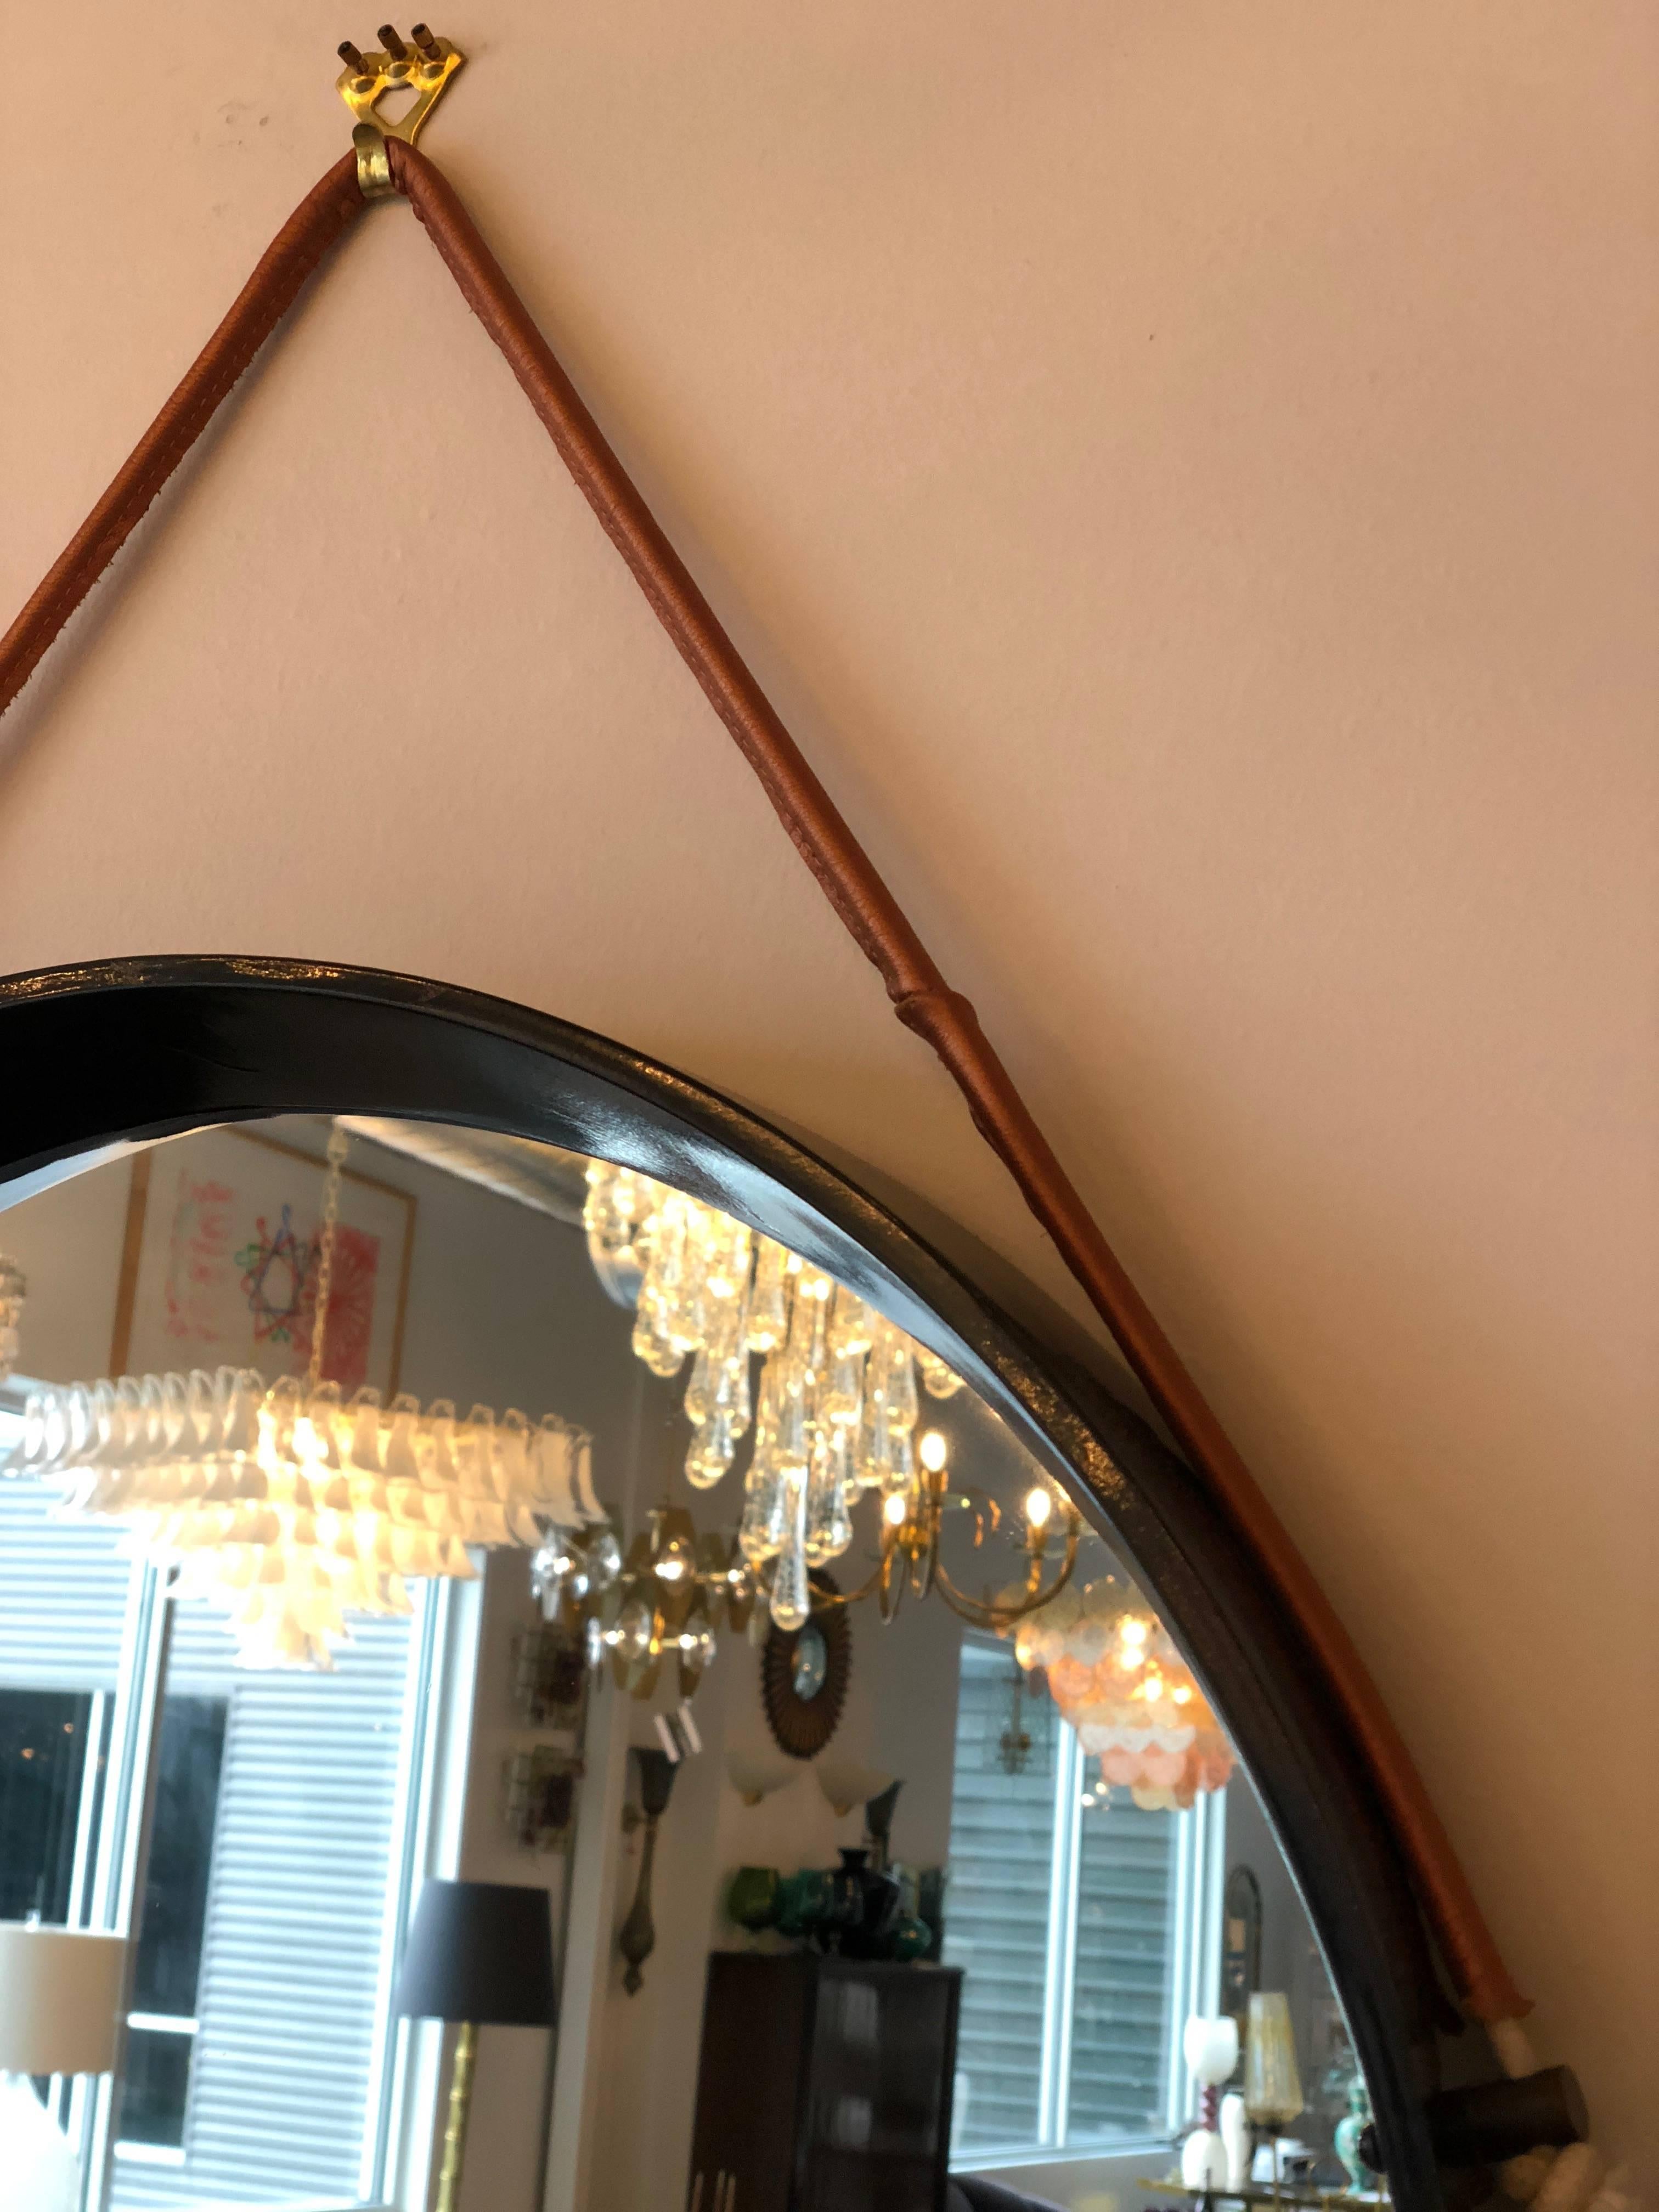 Offered is a mid century modern Jacques Adnet style newly lacquered in black and new leather strap in metallic copper hanging wall mirror. This modern mirror is a true testament to Mid-Century Modern design. This simple yet strong statement piece